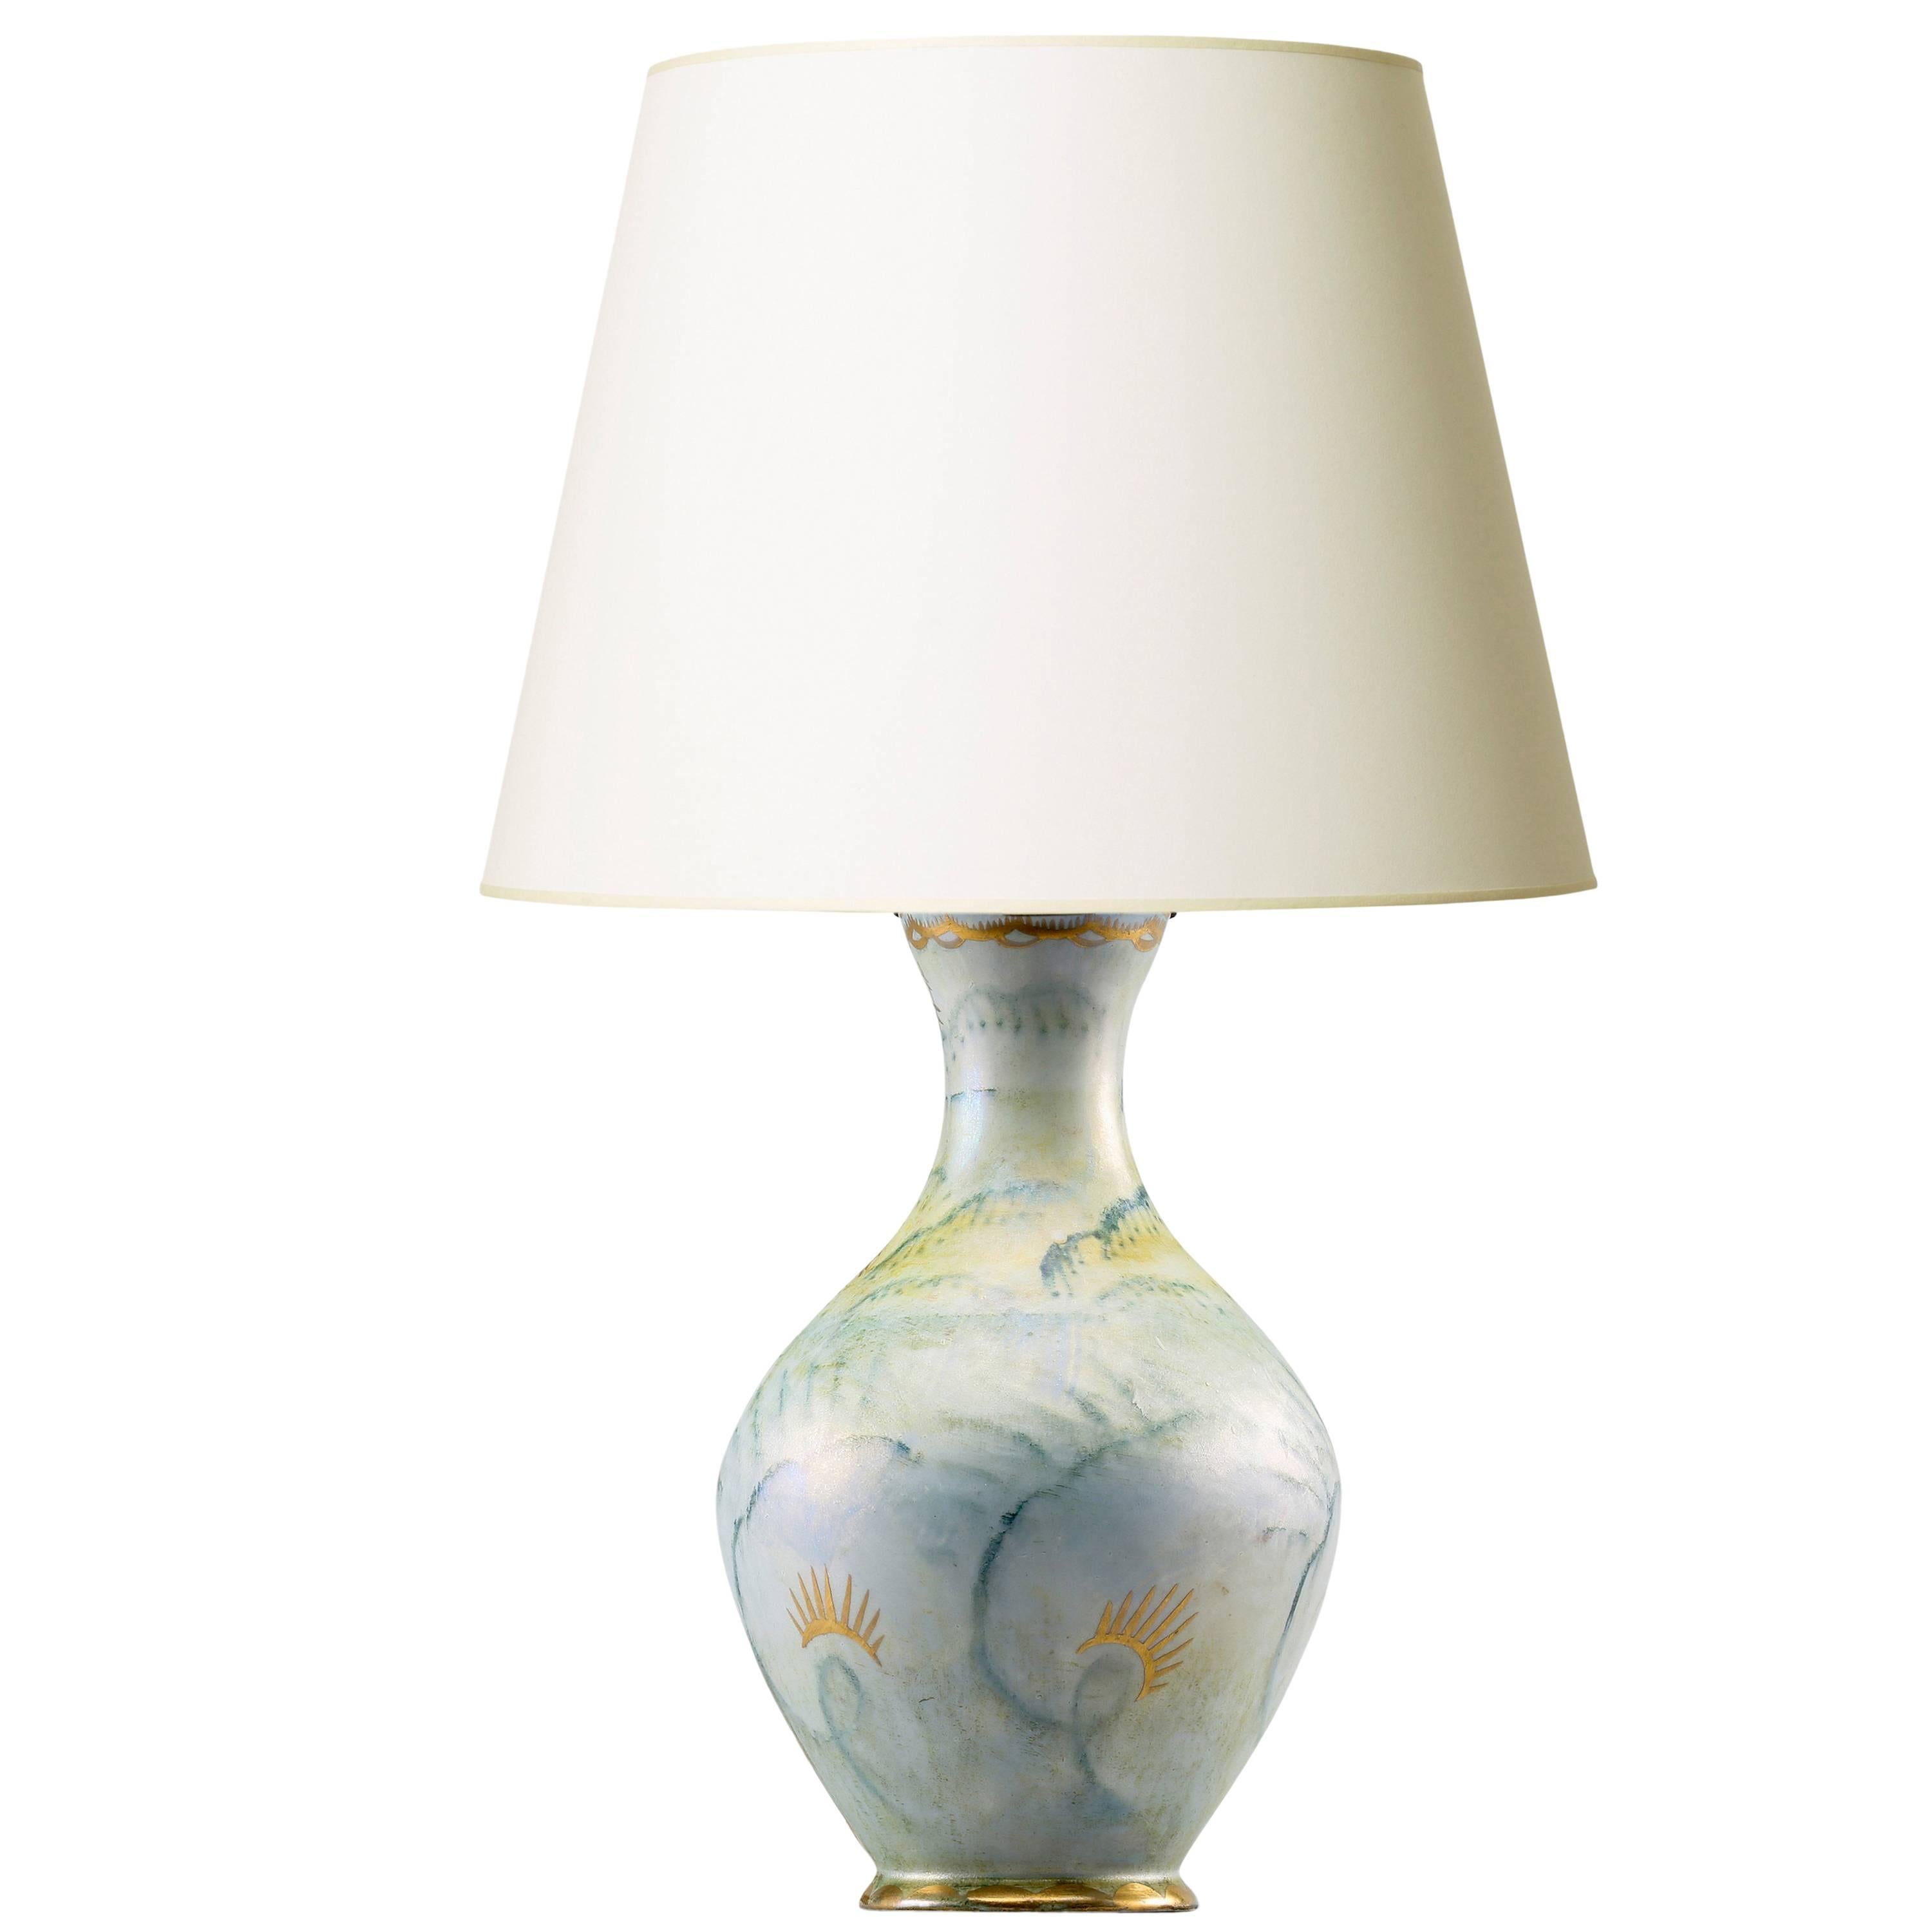 Romantic Hand-Painted and Gilded Table Lamp by Josef Ekberg for Gustavsberg For Sale